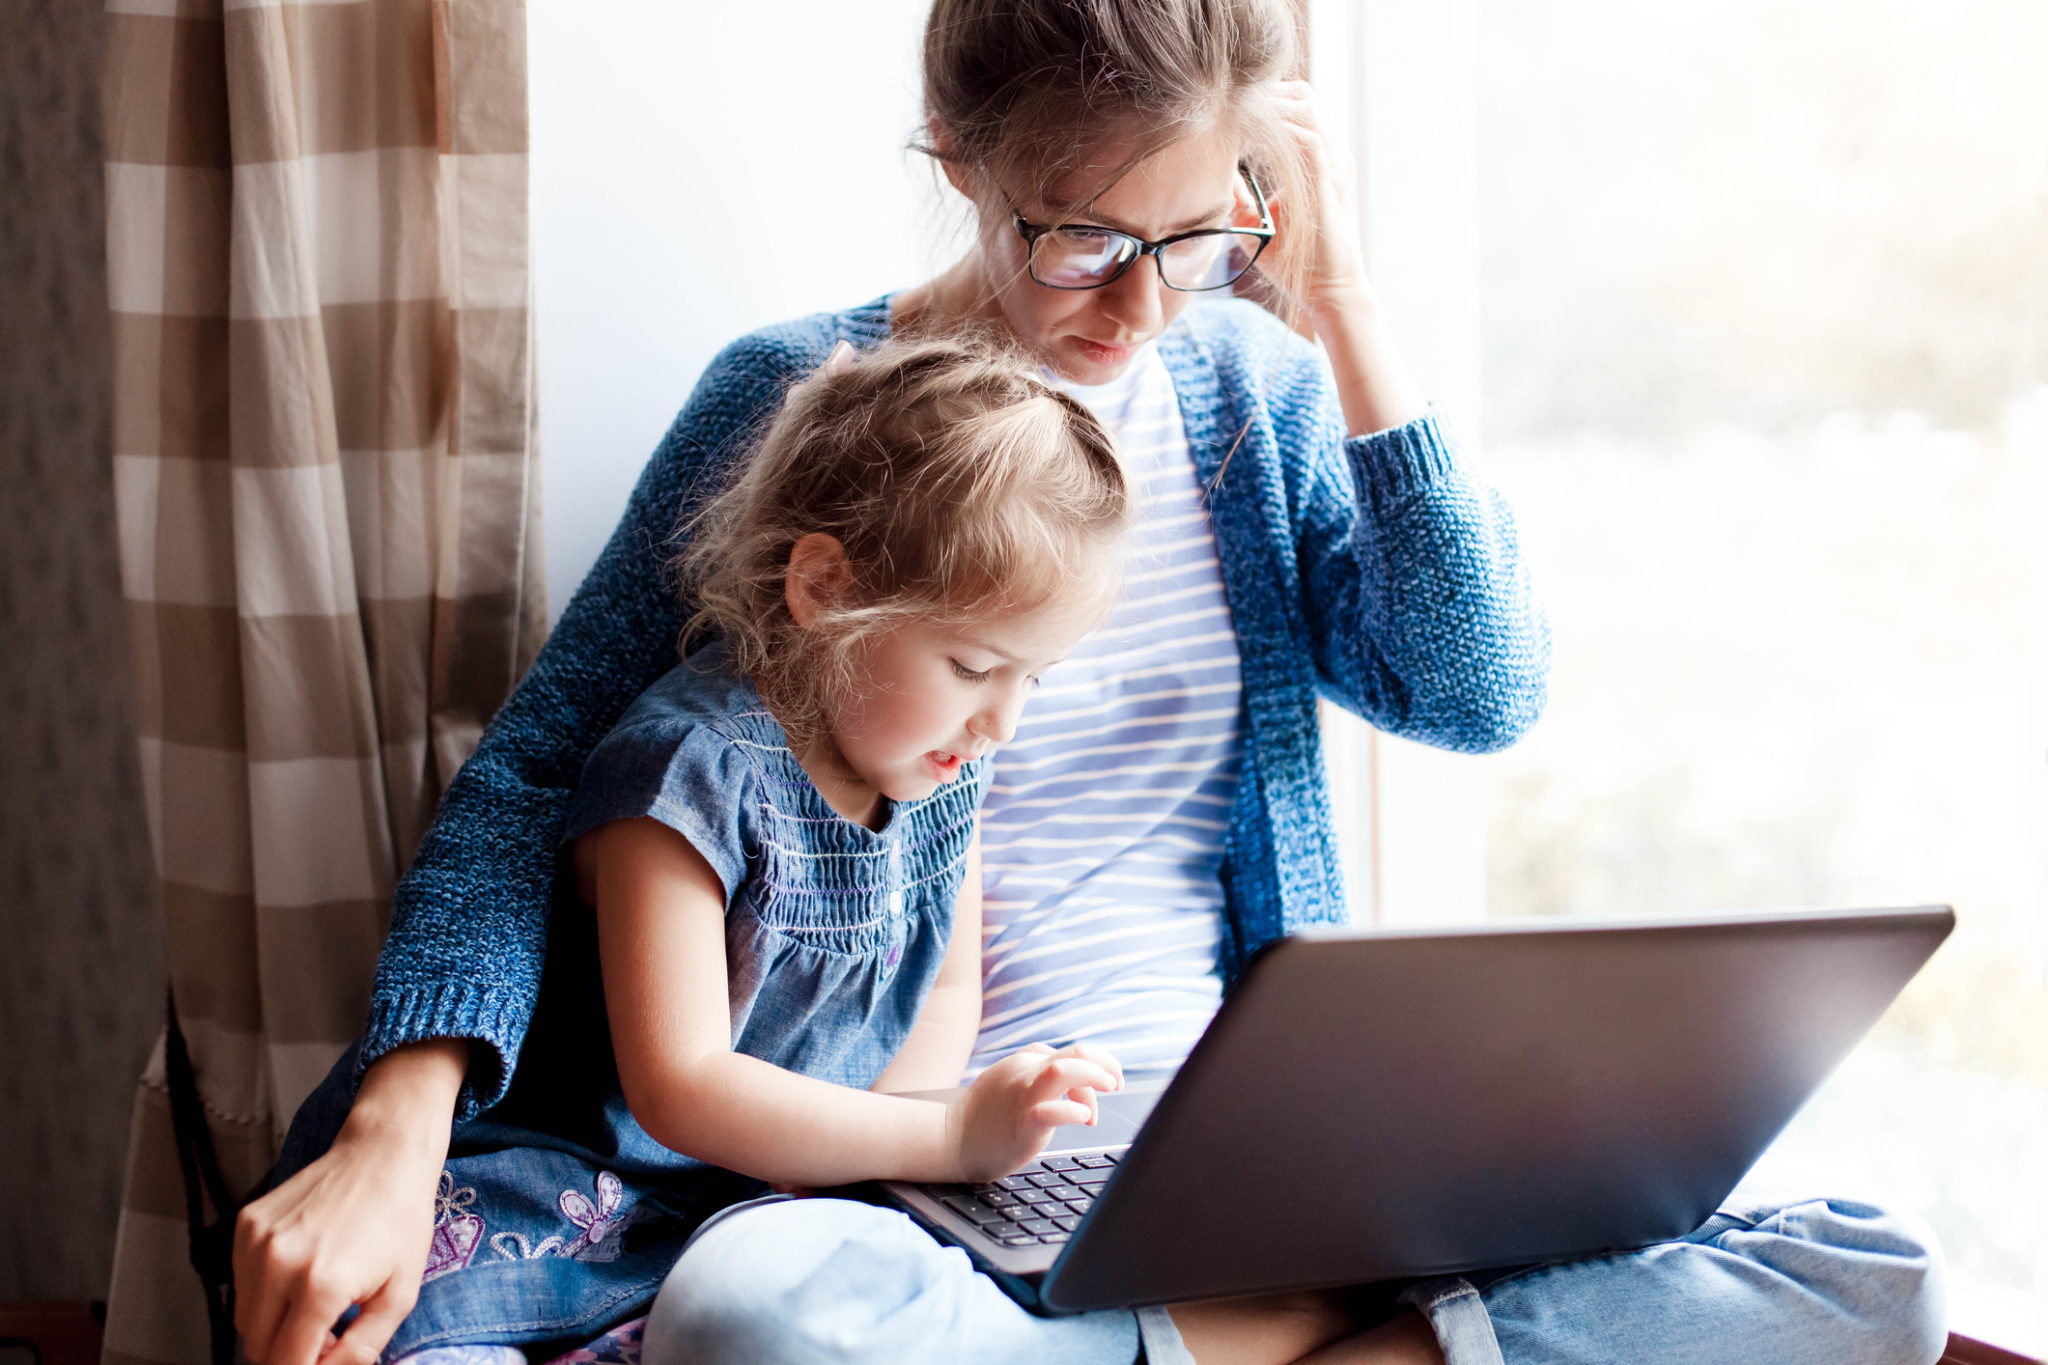 Working Mum works from home office with kid. Mother and daughter wearing blue and looking at a laptop.